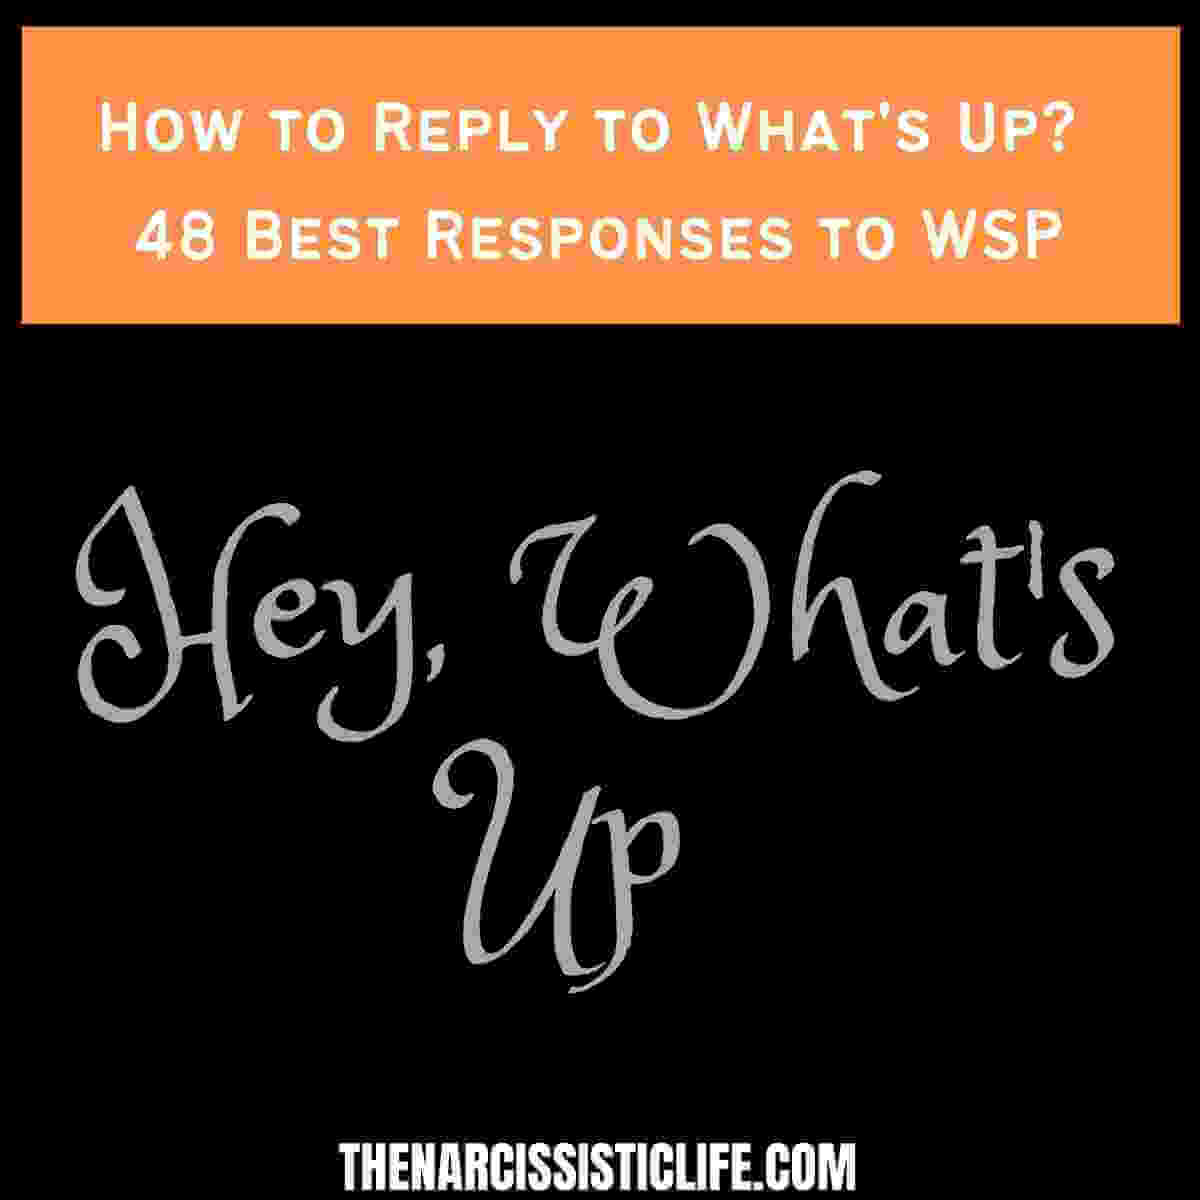 How to Reply to What's Up 48 Best Responses to WSP